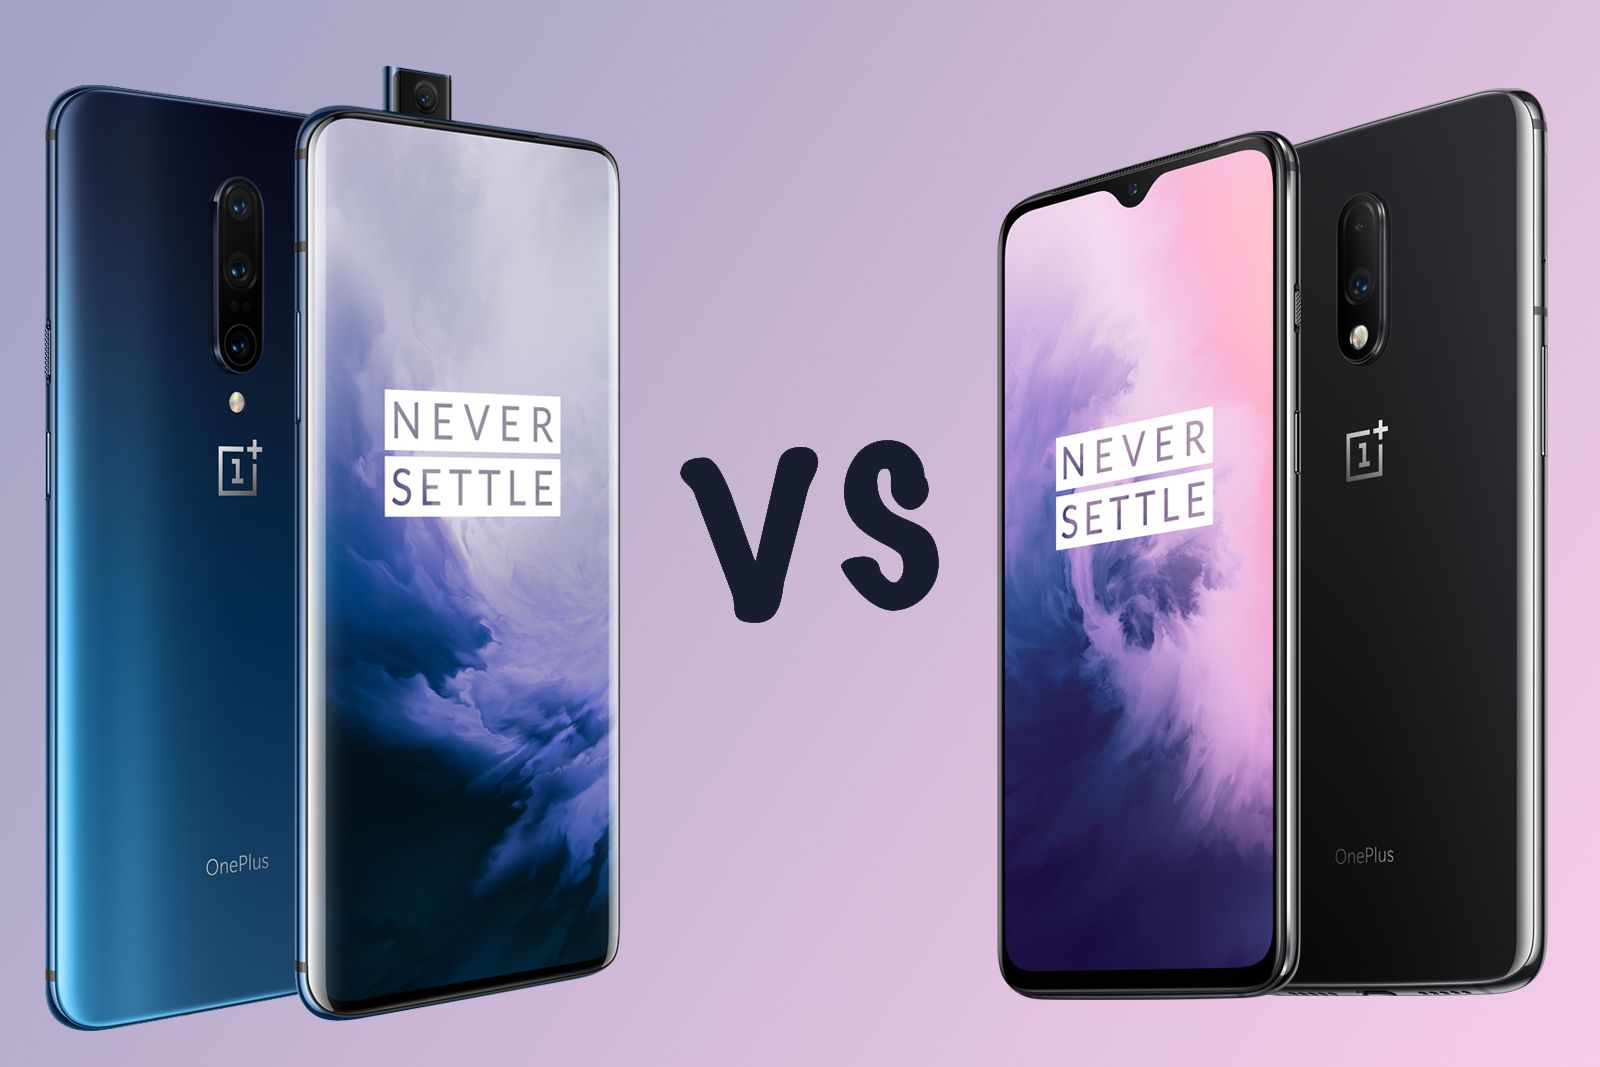 Oneplus 7 Pro Vs Oneplus 7 Which Should You Buy image 1